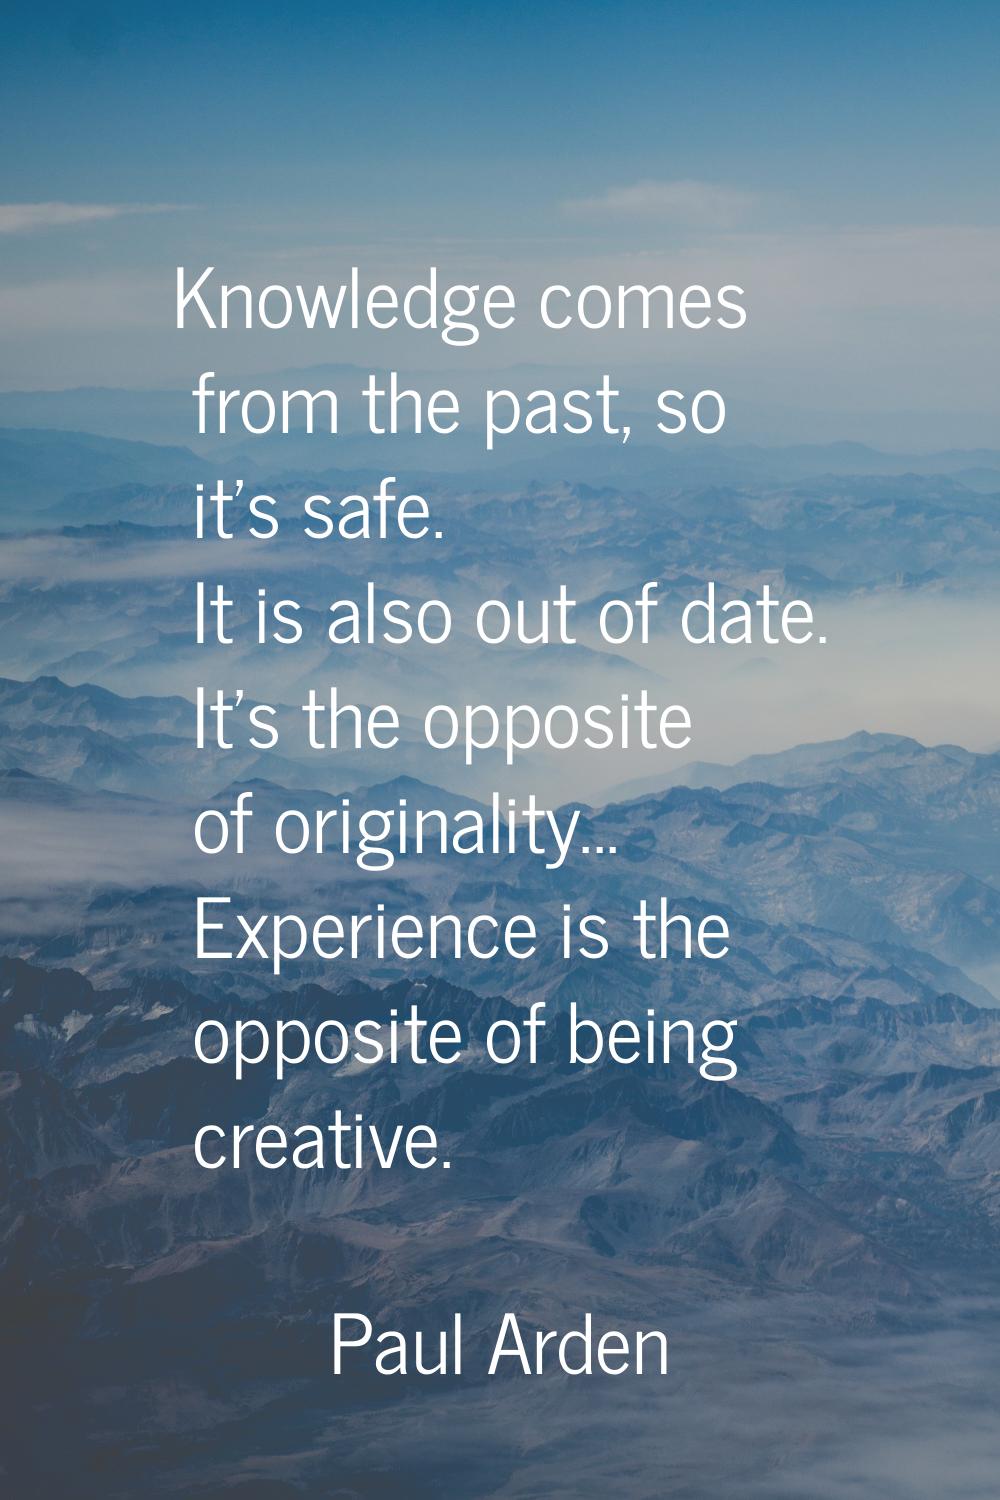 Knowledge comes from the past, so it's safe. It is also out of date. It's the opposite of originali